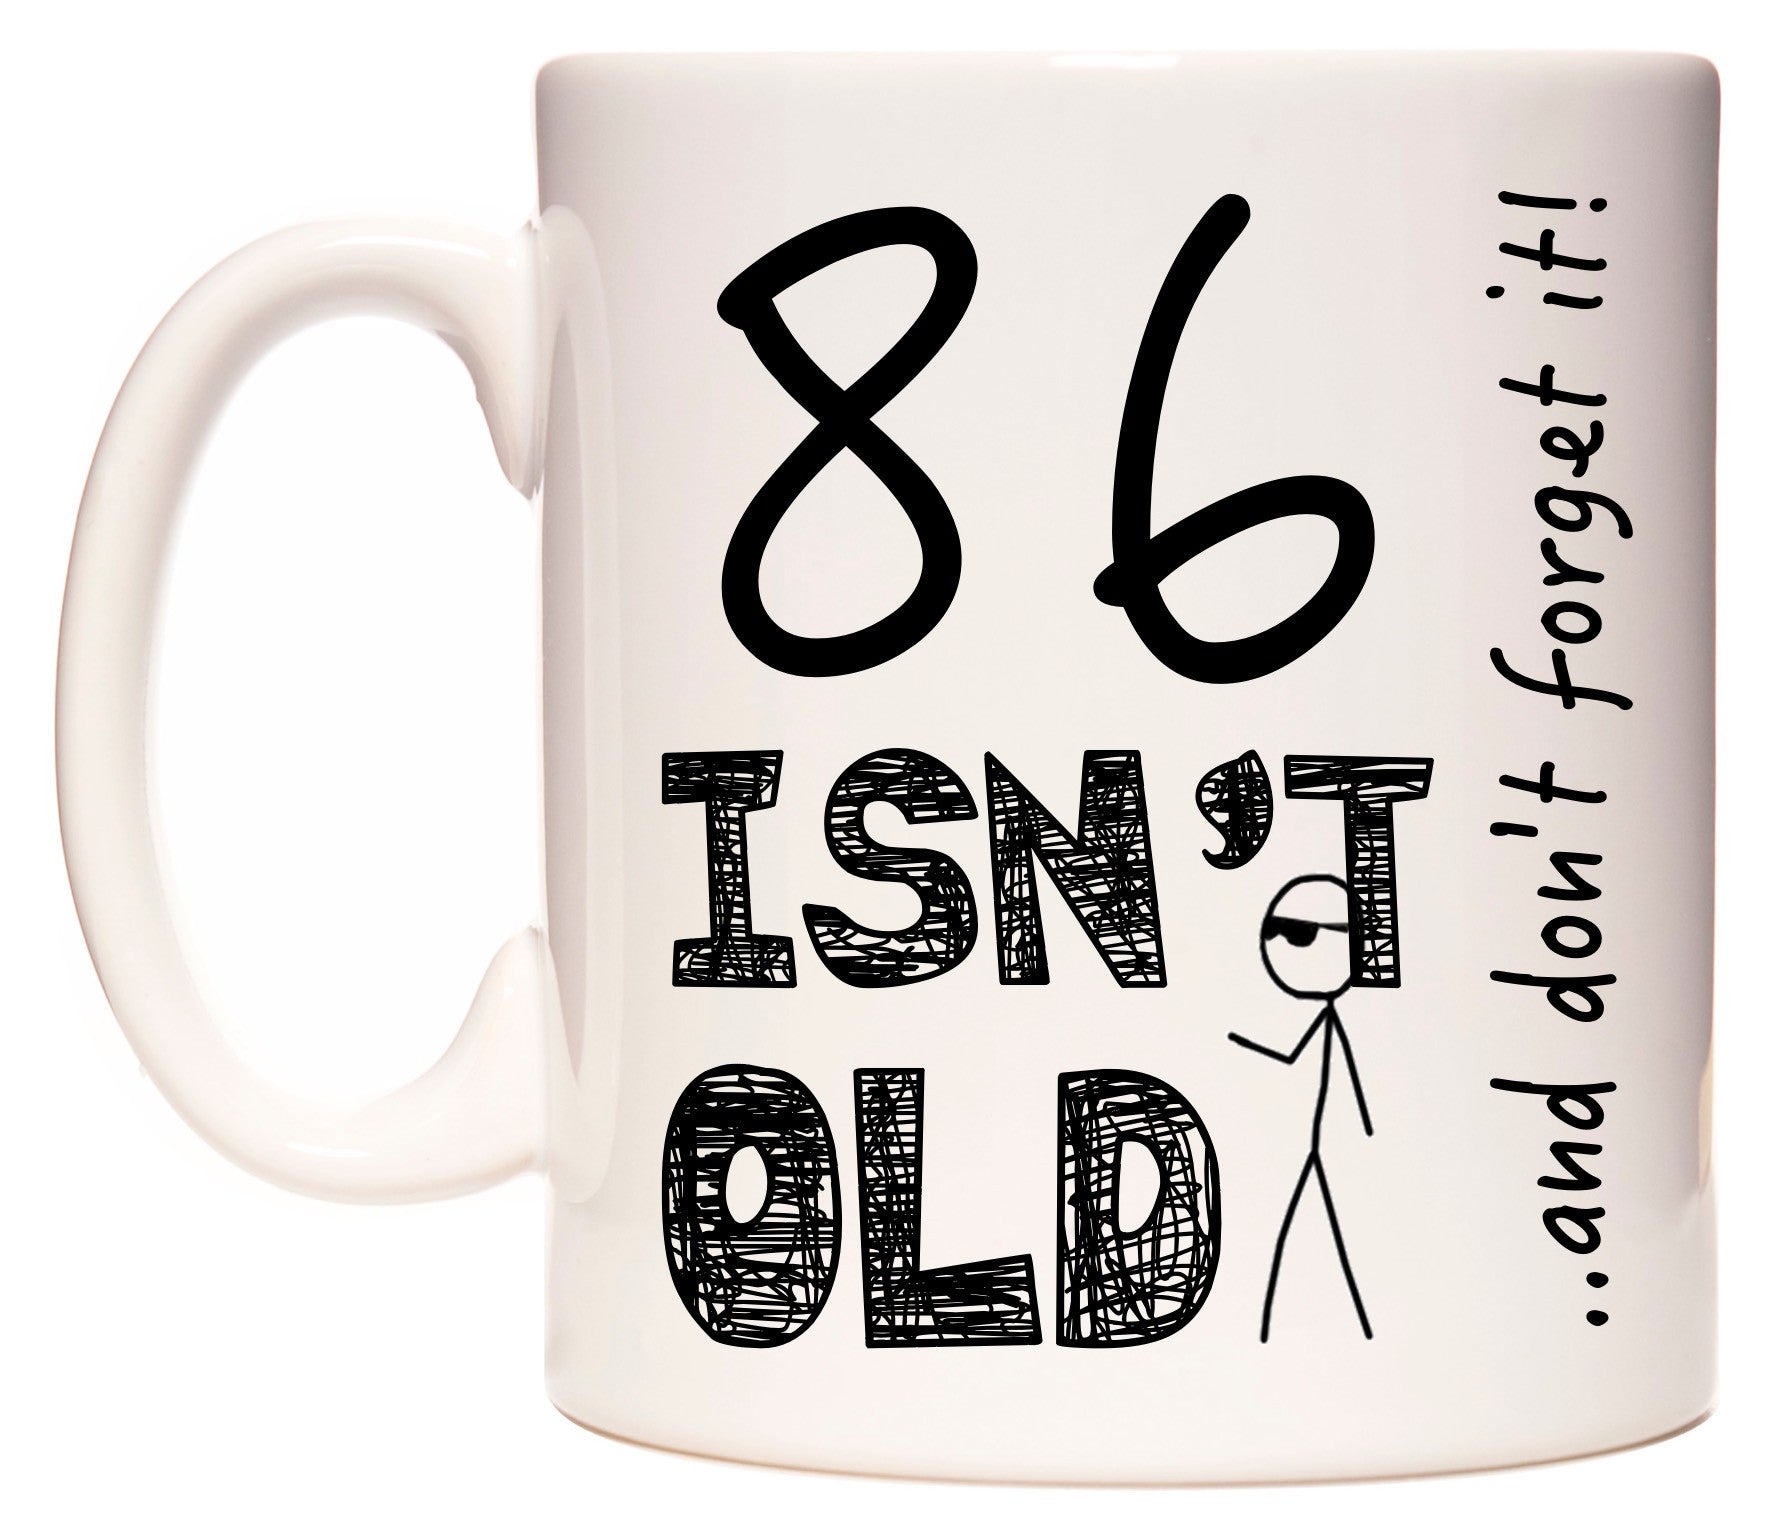 This mug features 86 Isn't Old